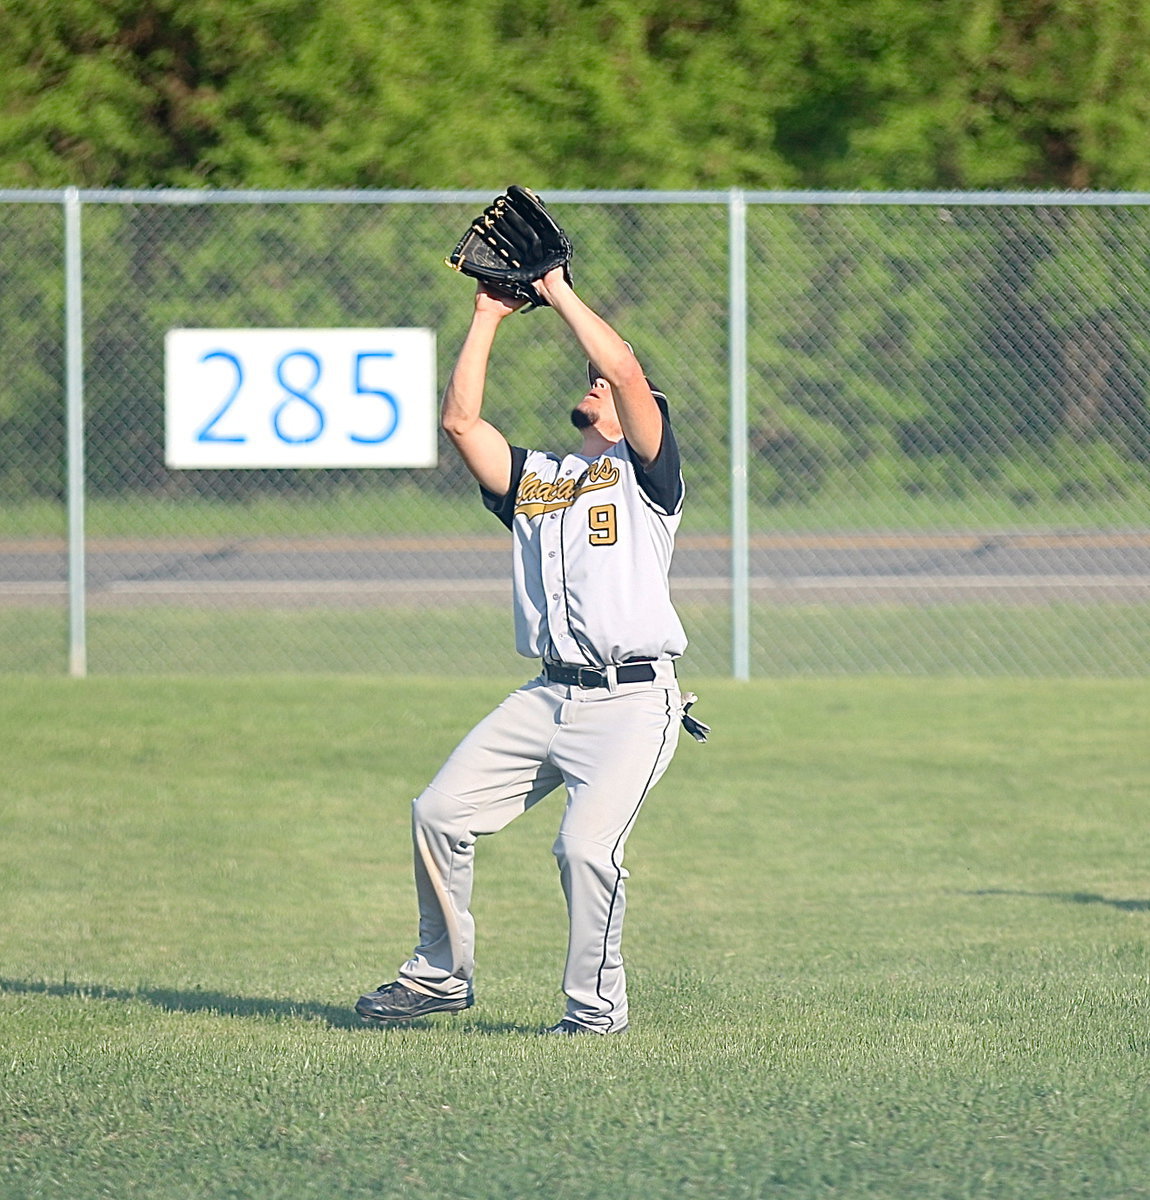 Image: Tyler Anderson(9) gets under a pop-up to make the catch from his shortstop position for the Gladiators.